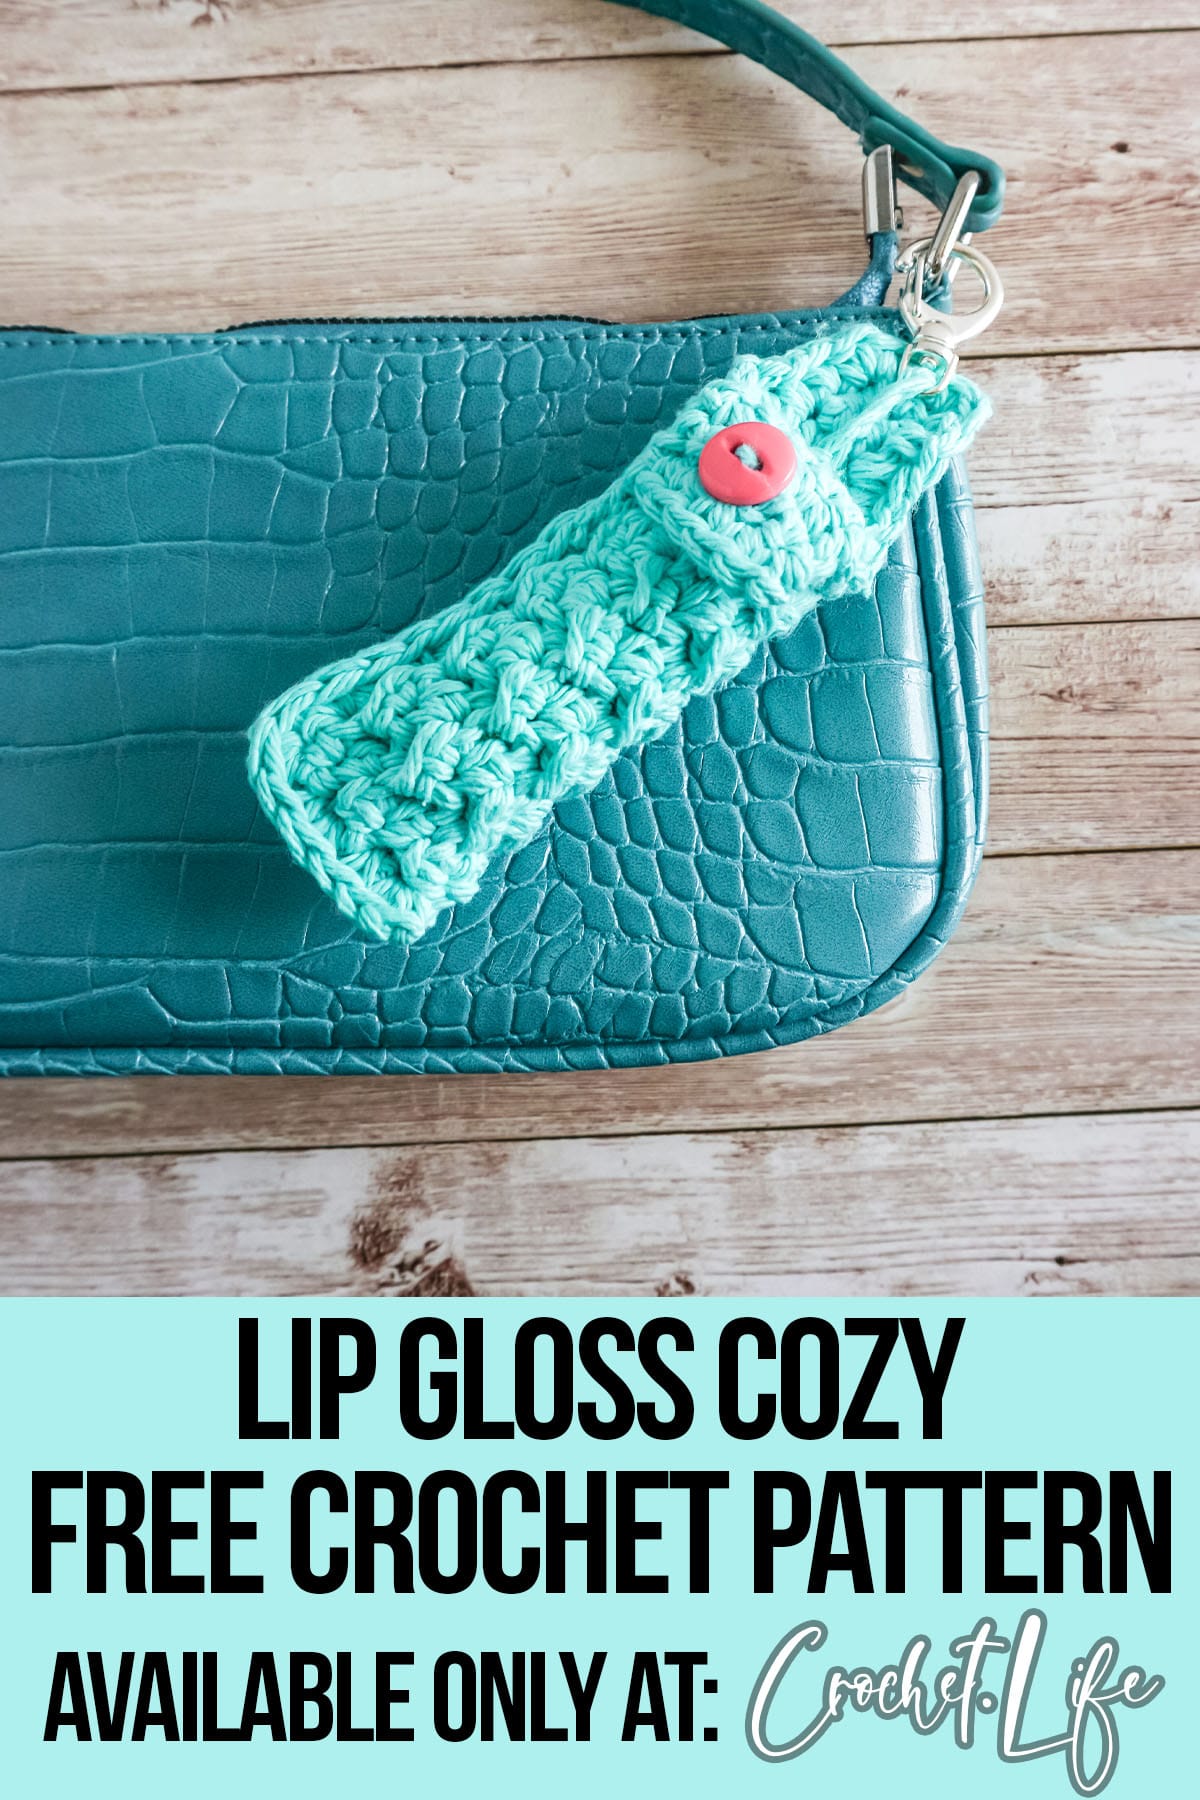 chapstick cozy crochet pattern with text which reads Lip Gloss Cozy free Crochet Pattern